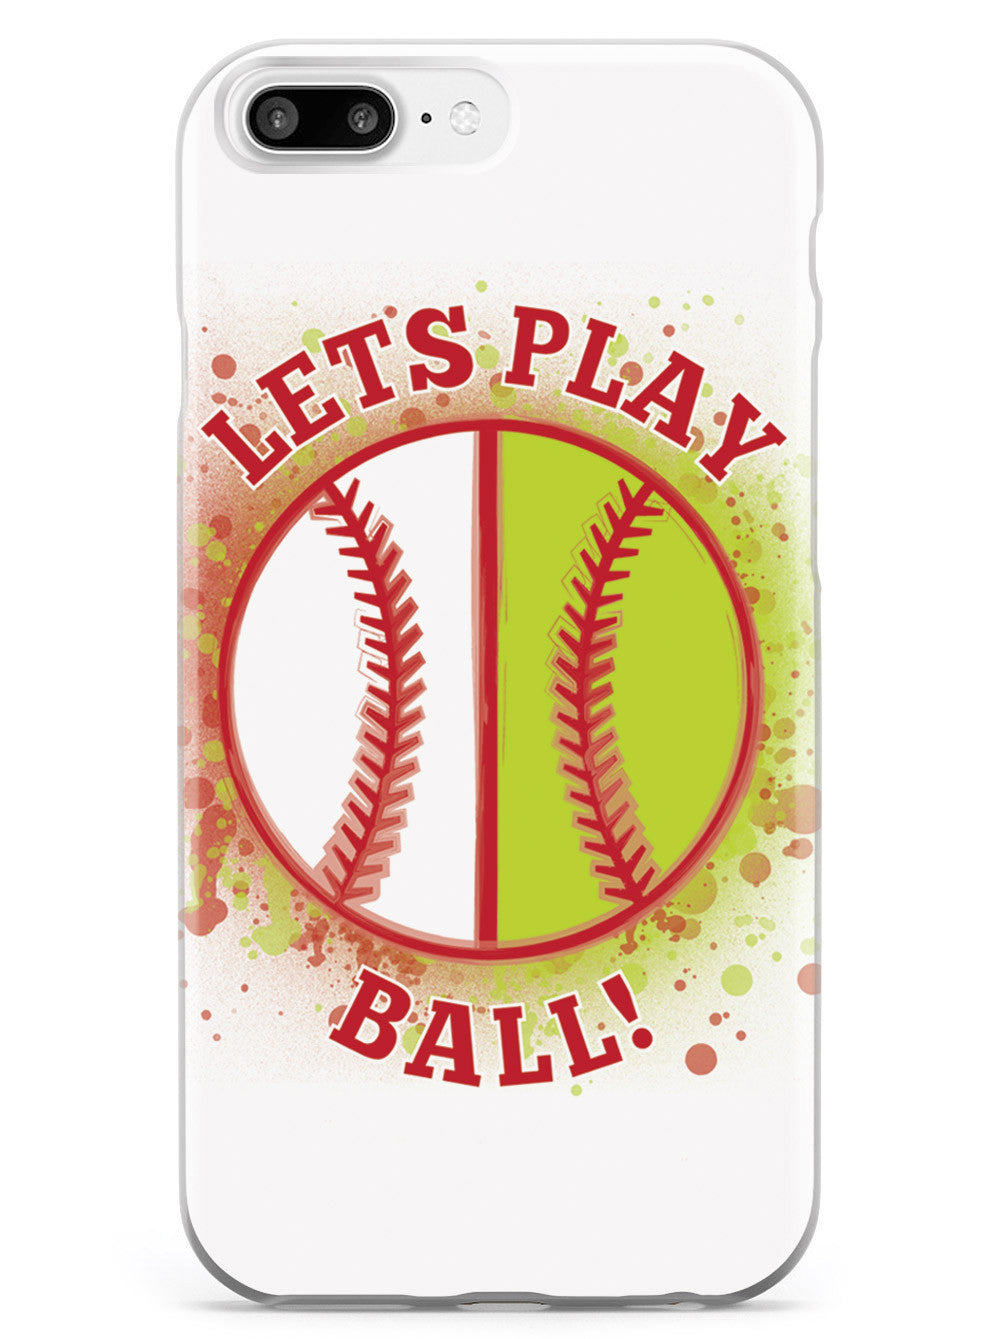 Let's Play Ball Case